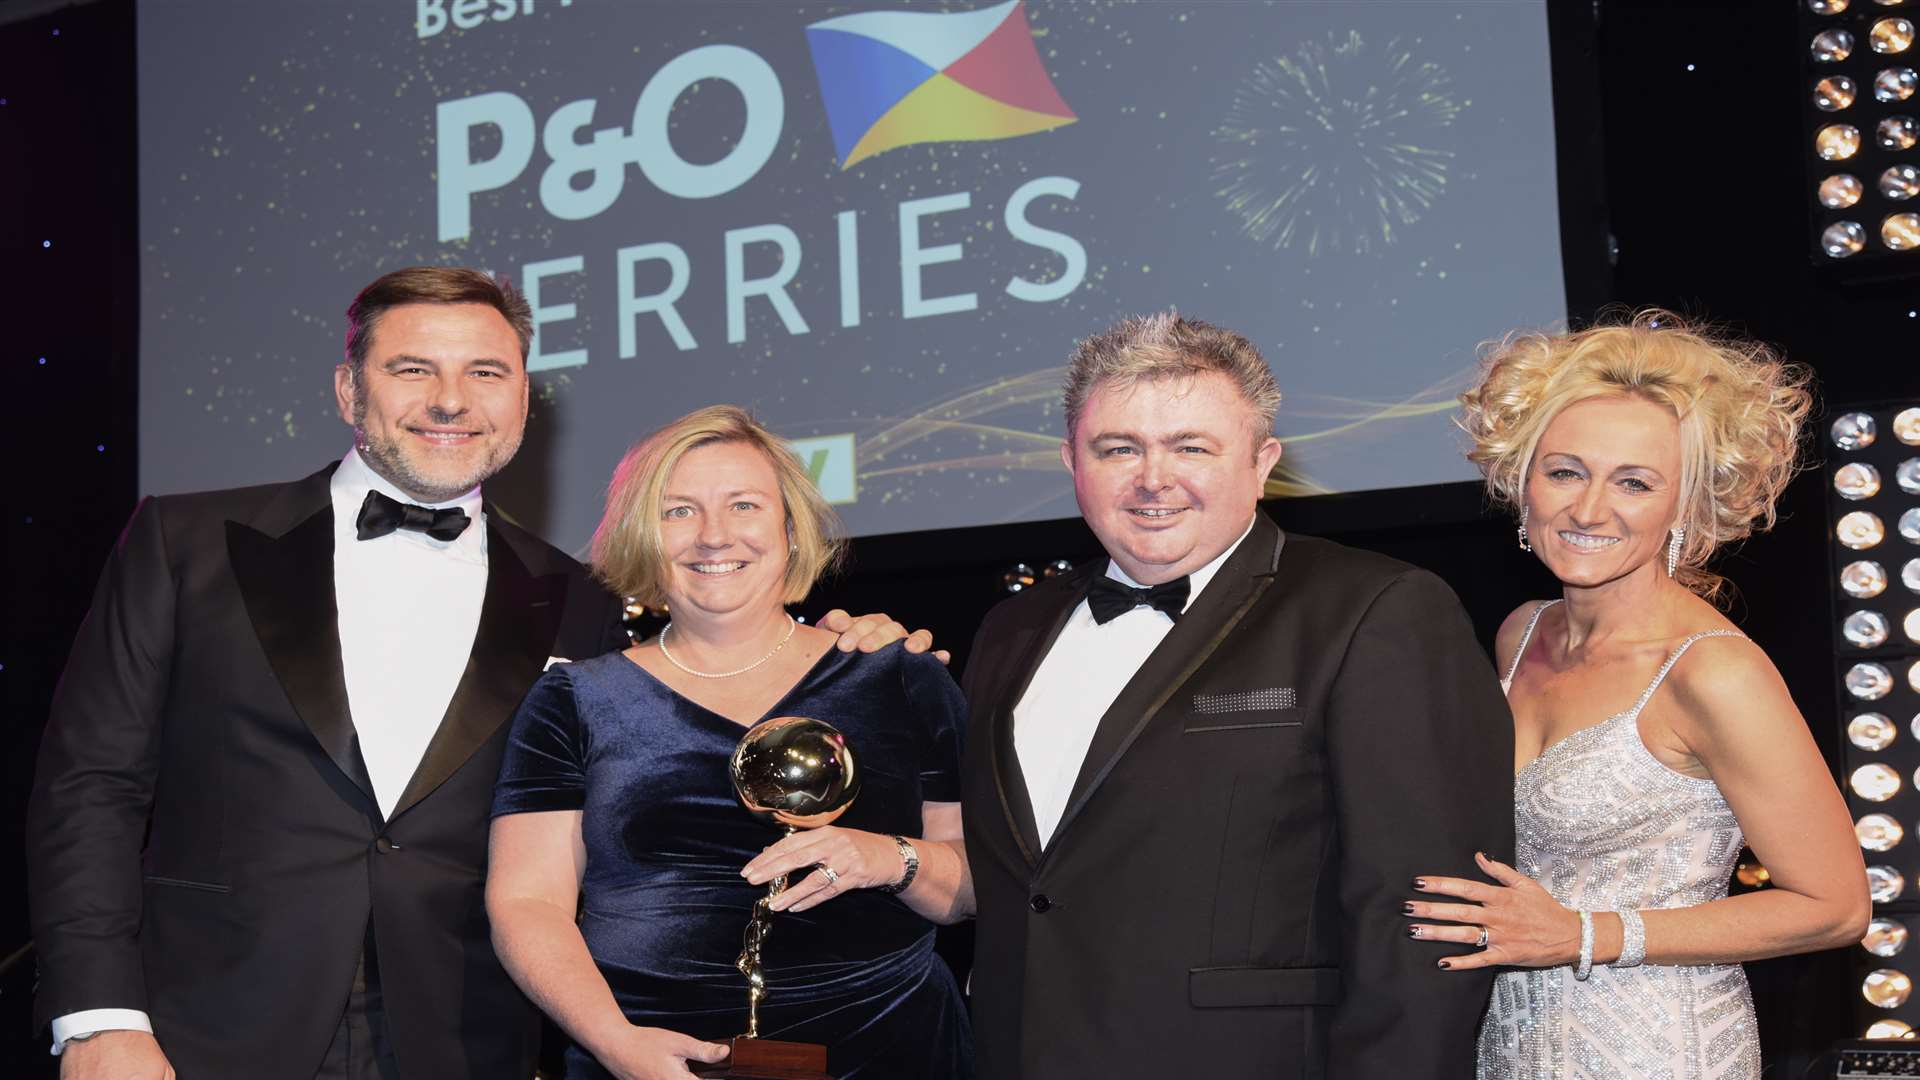 Double award for P&O Ferries. From left, TV star David Walliams: P&O Ferries MD Janette Bell: Olly Wenn, managing director of category sponsors, the travel web firm Zolv, and Lucy Huxley, editor of Travel Weekly.